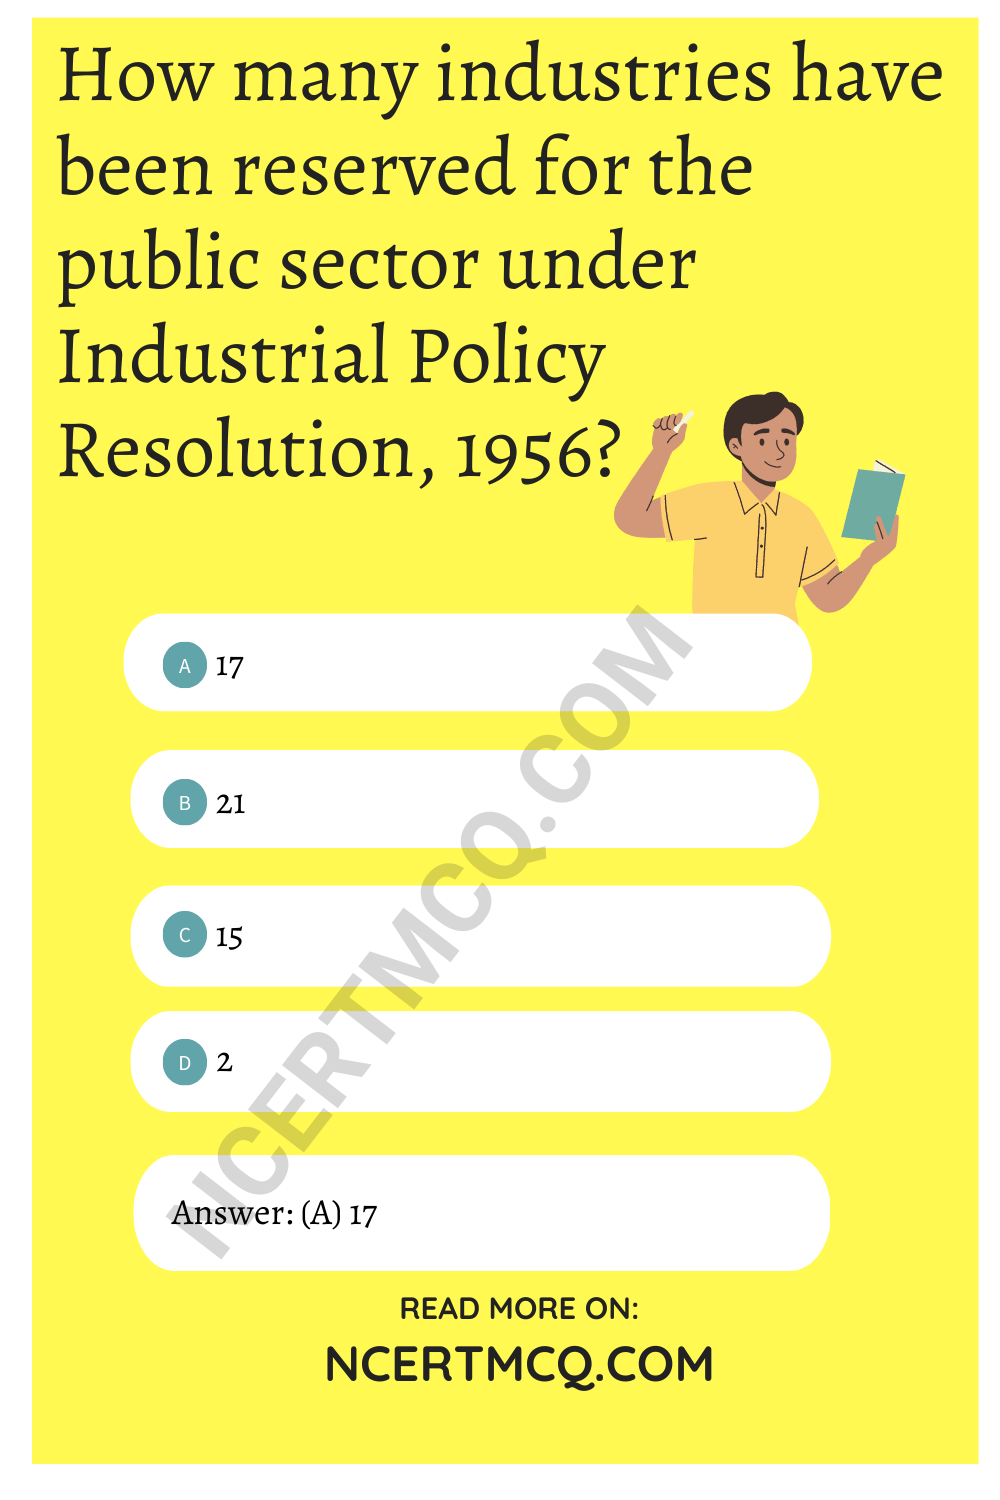 How many industries have been reserved for the public sector under Industrial Policy Resolution, 1956?